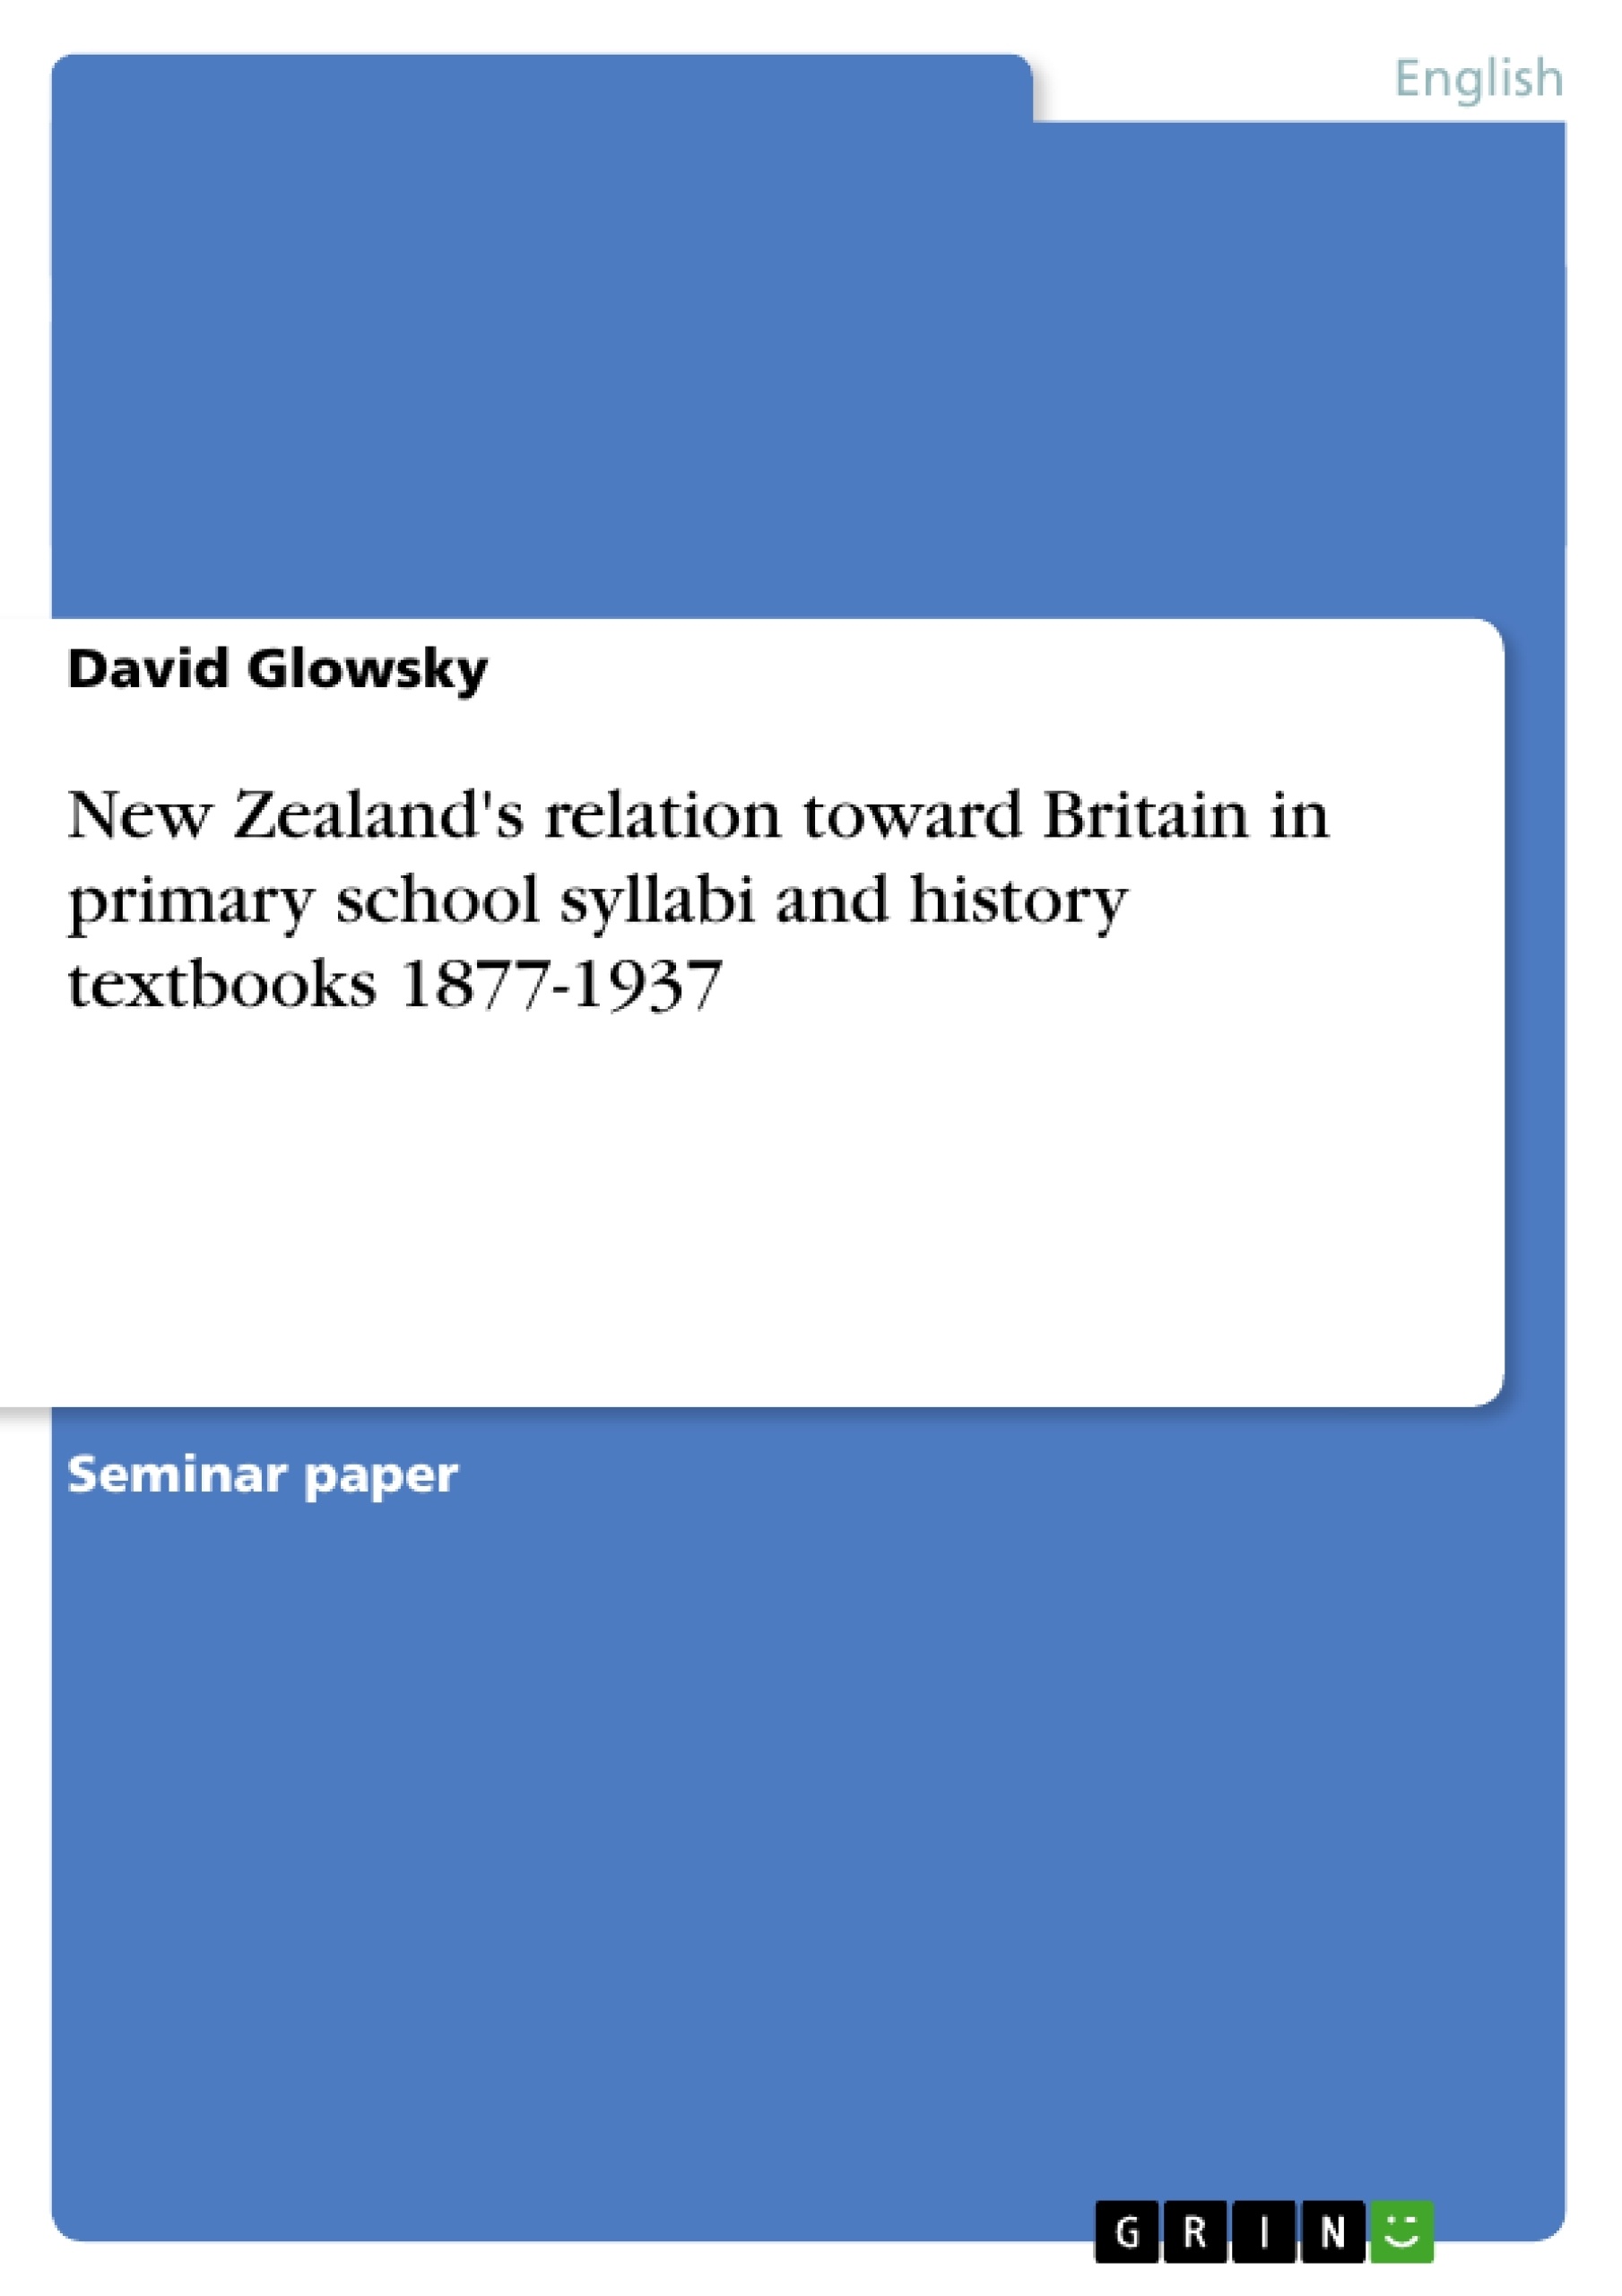 Title: New Zealand's relation toward Britain in primary school syllabi and history textbooks 1877-1937